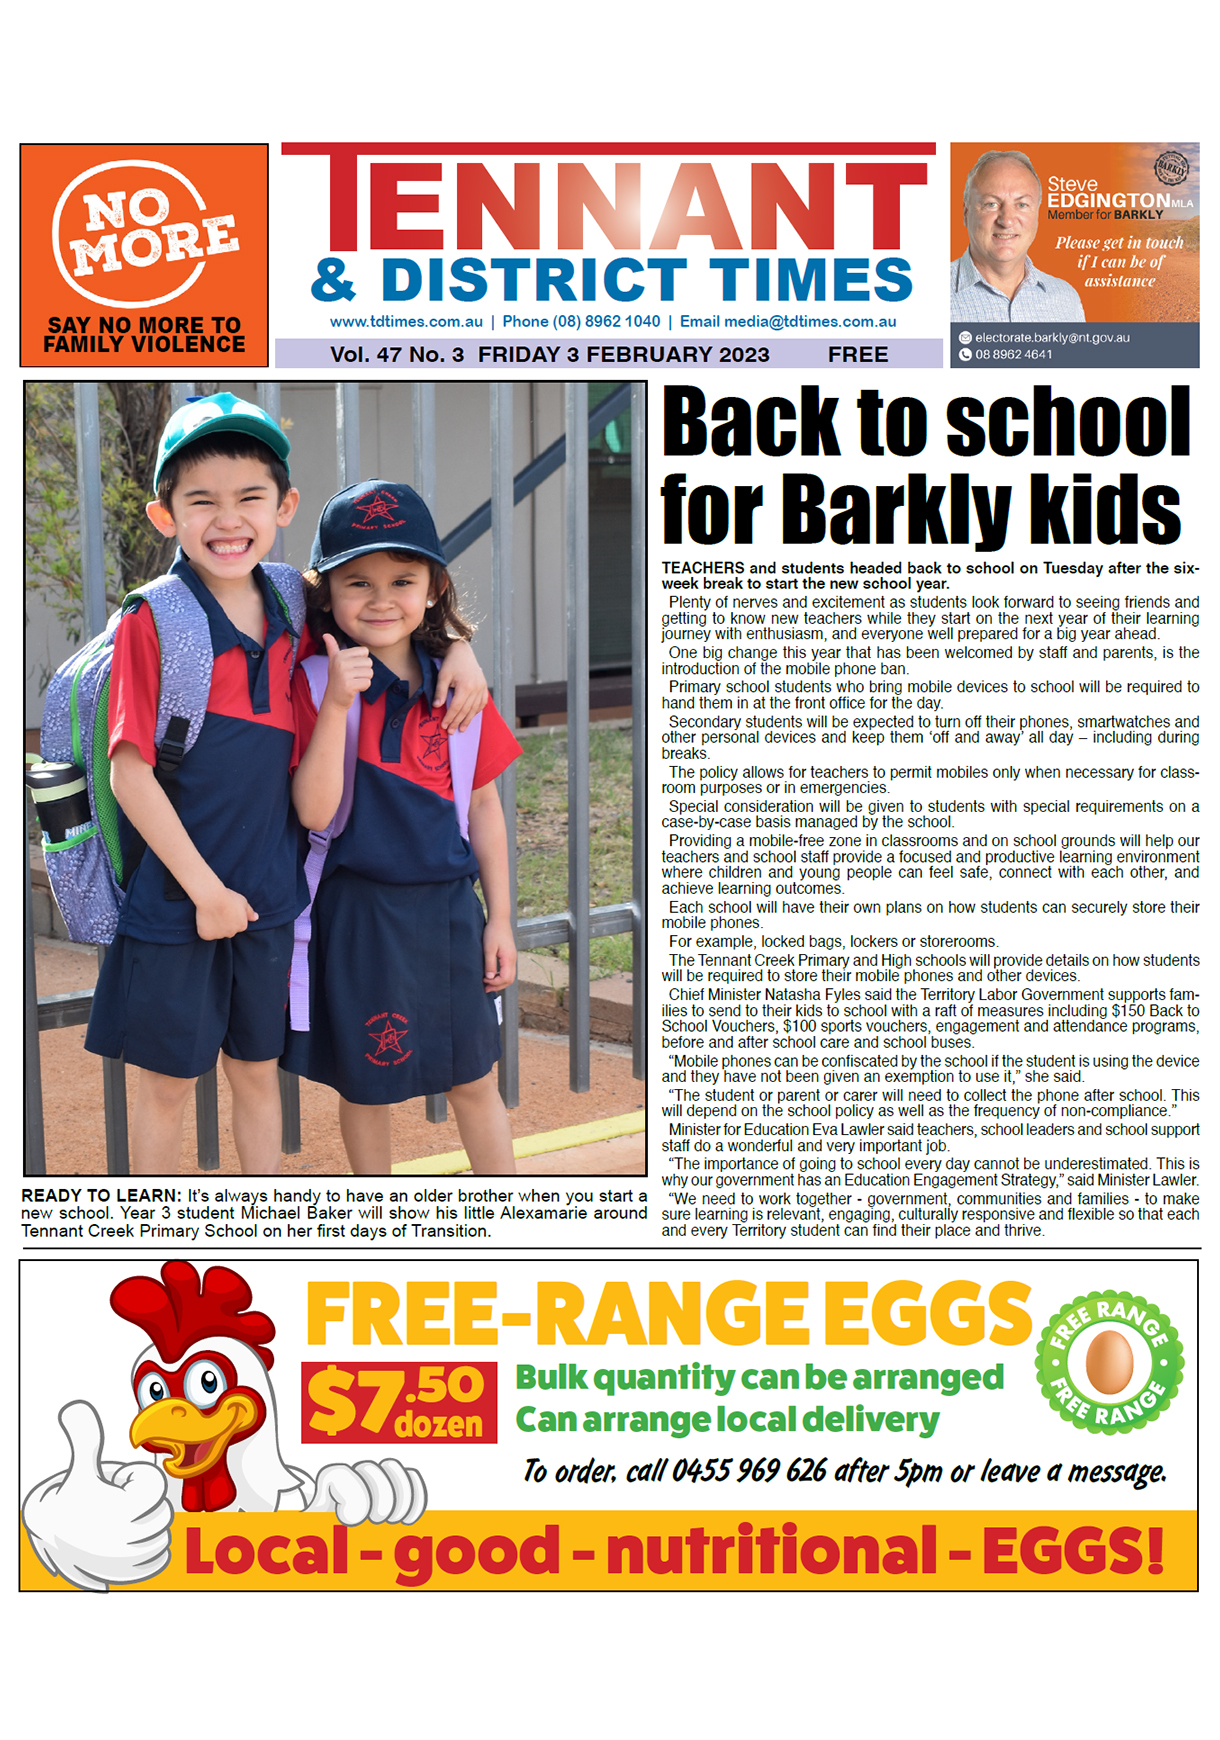 Tennant & District Times 3 February 2023